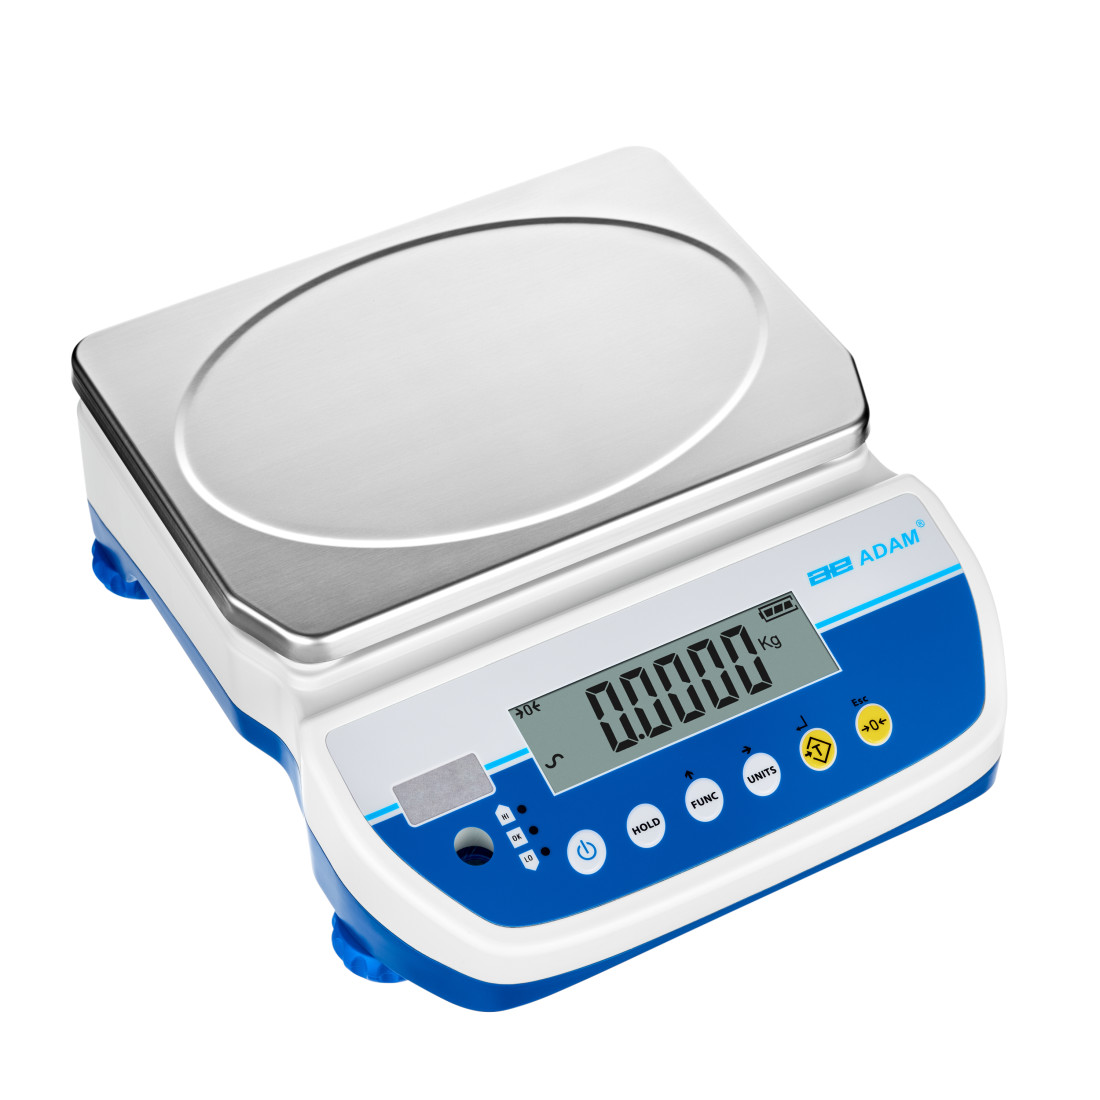 Latitude High Resolution Compact Bench Scales